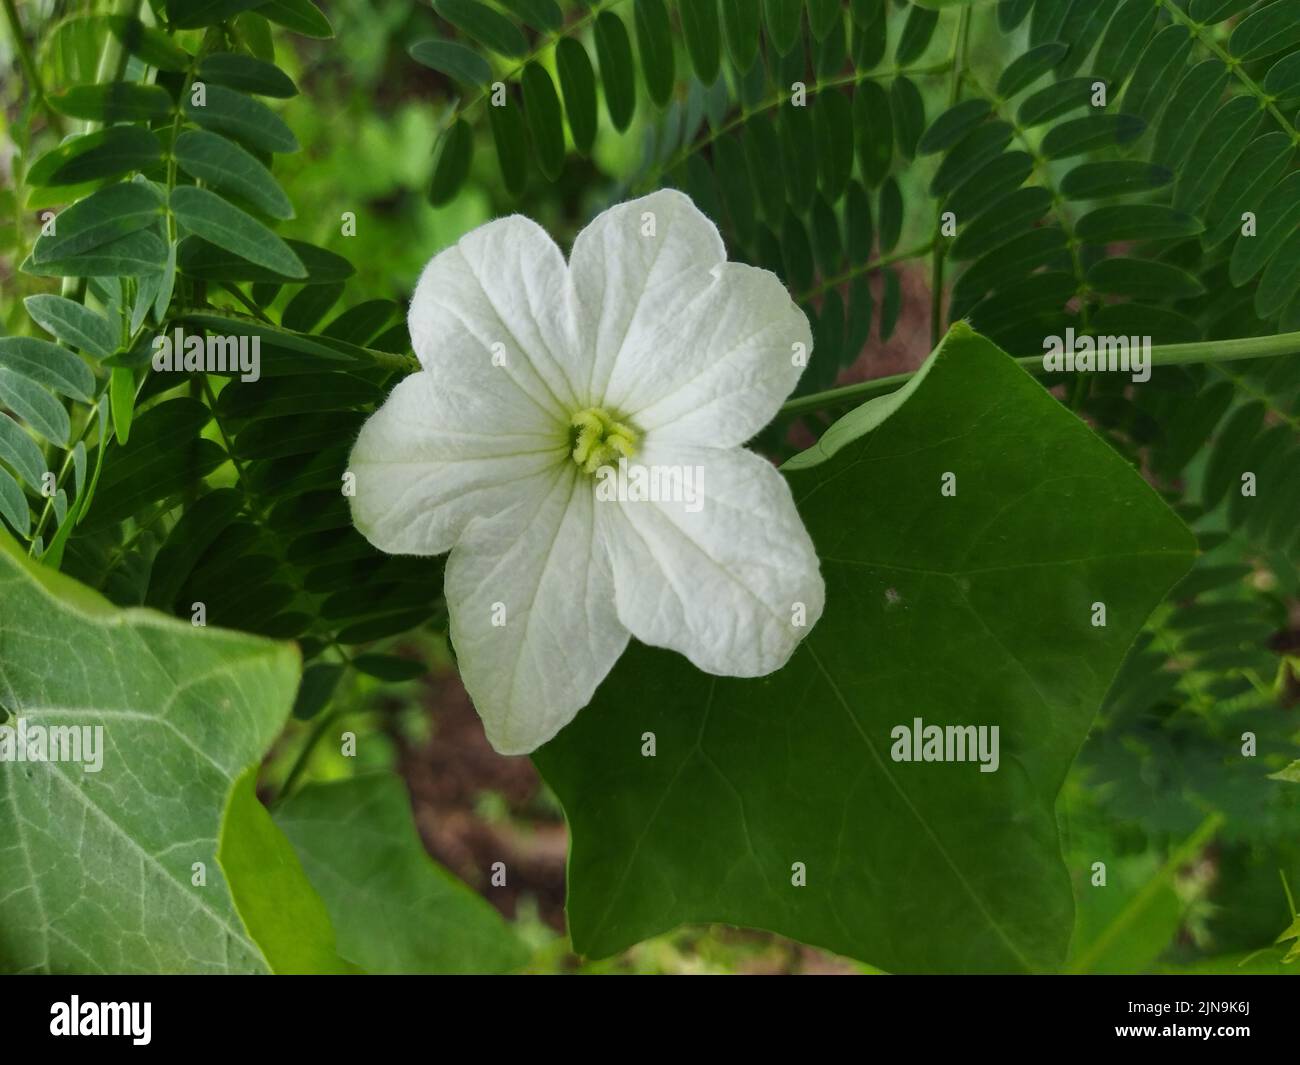 A White Cocciniagran flower are blooming Stock Photo